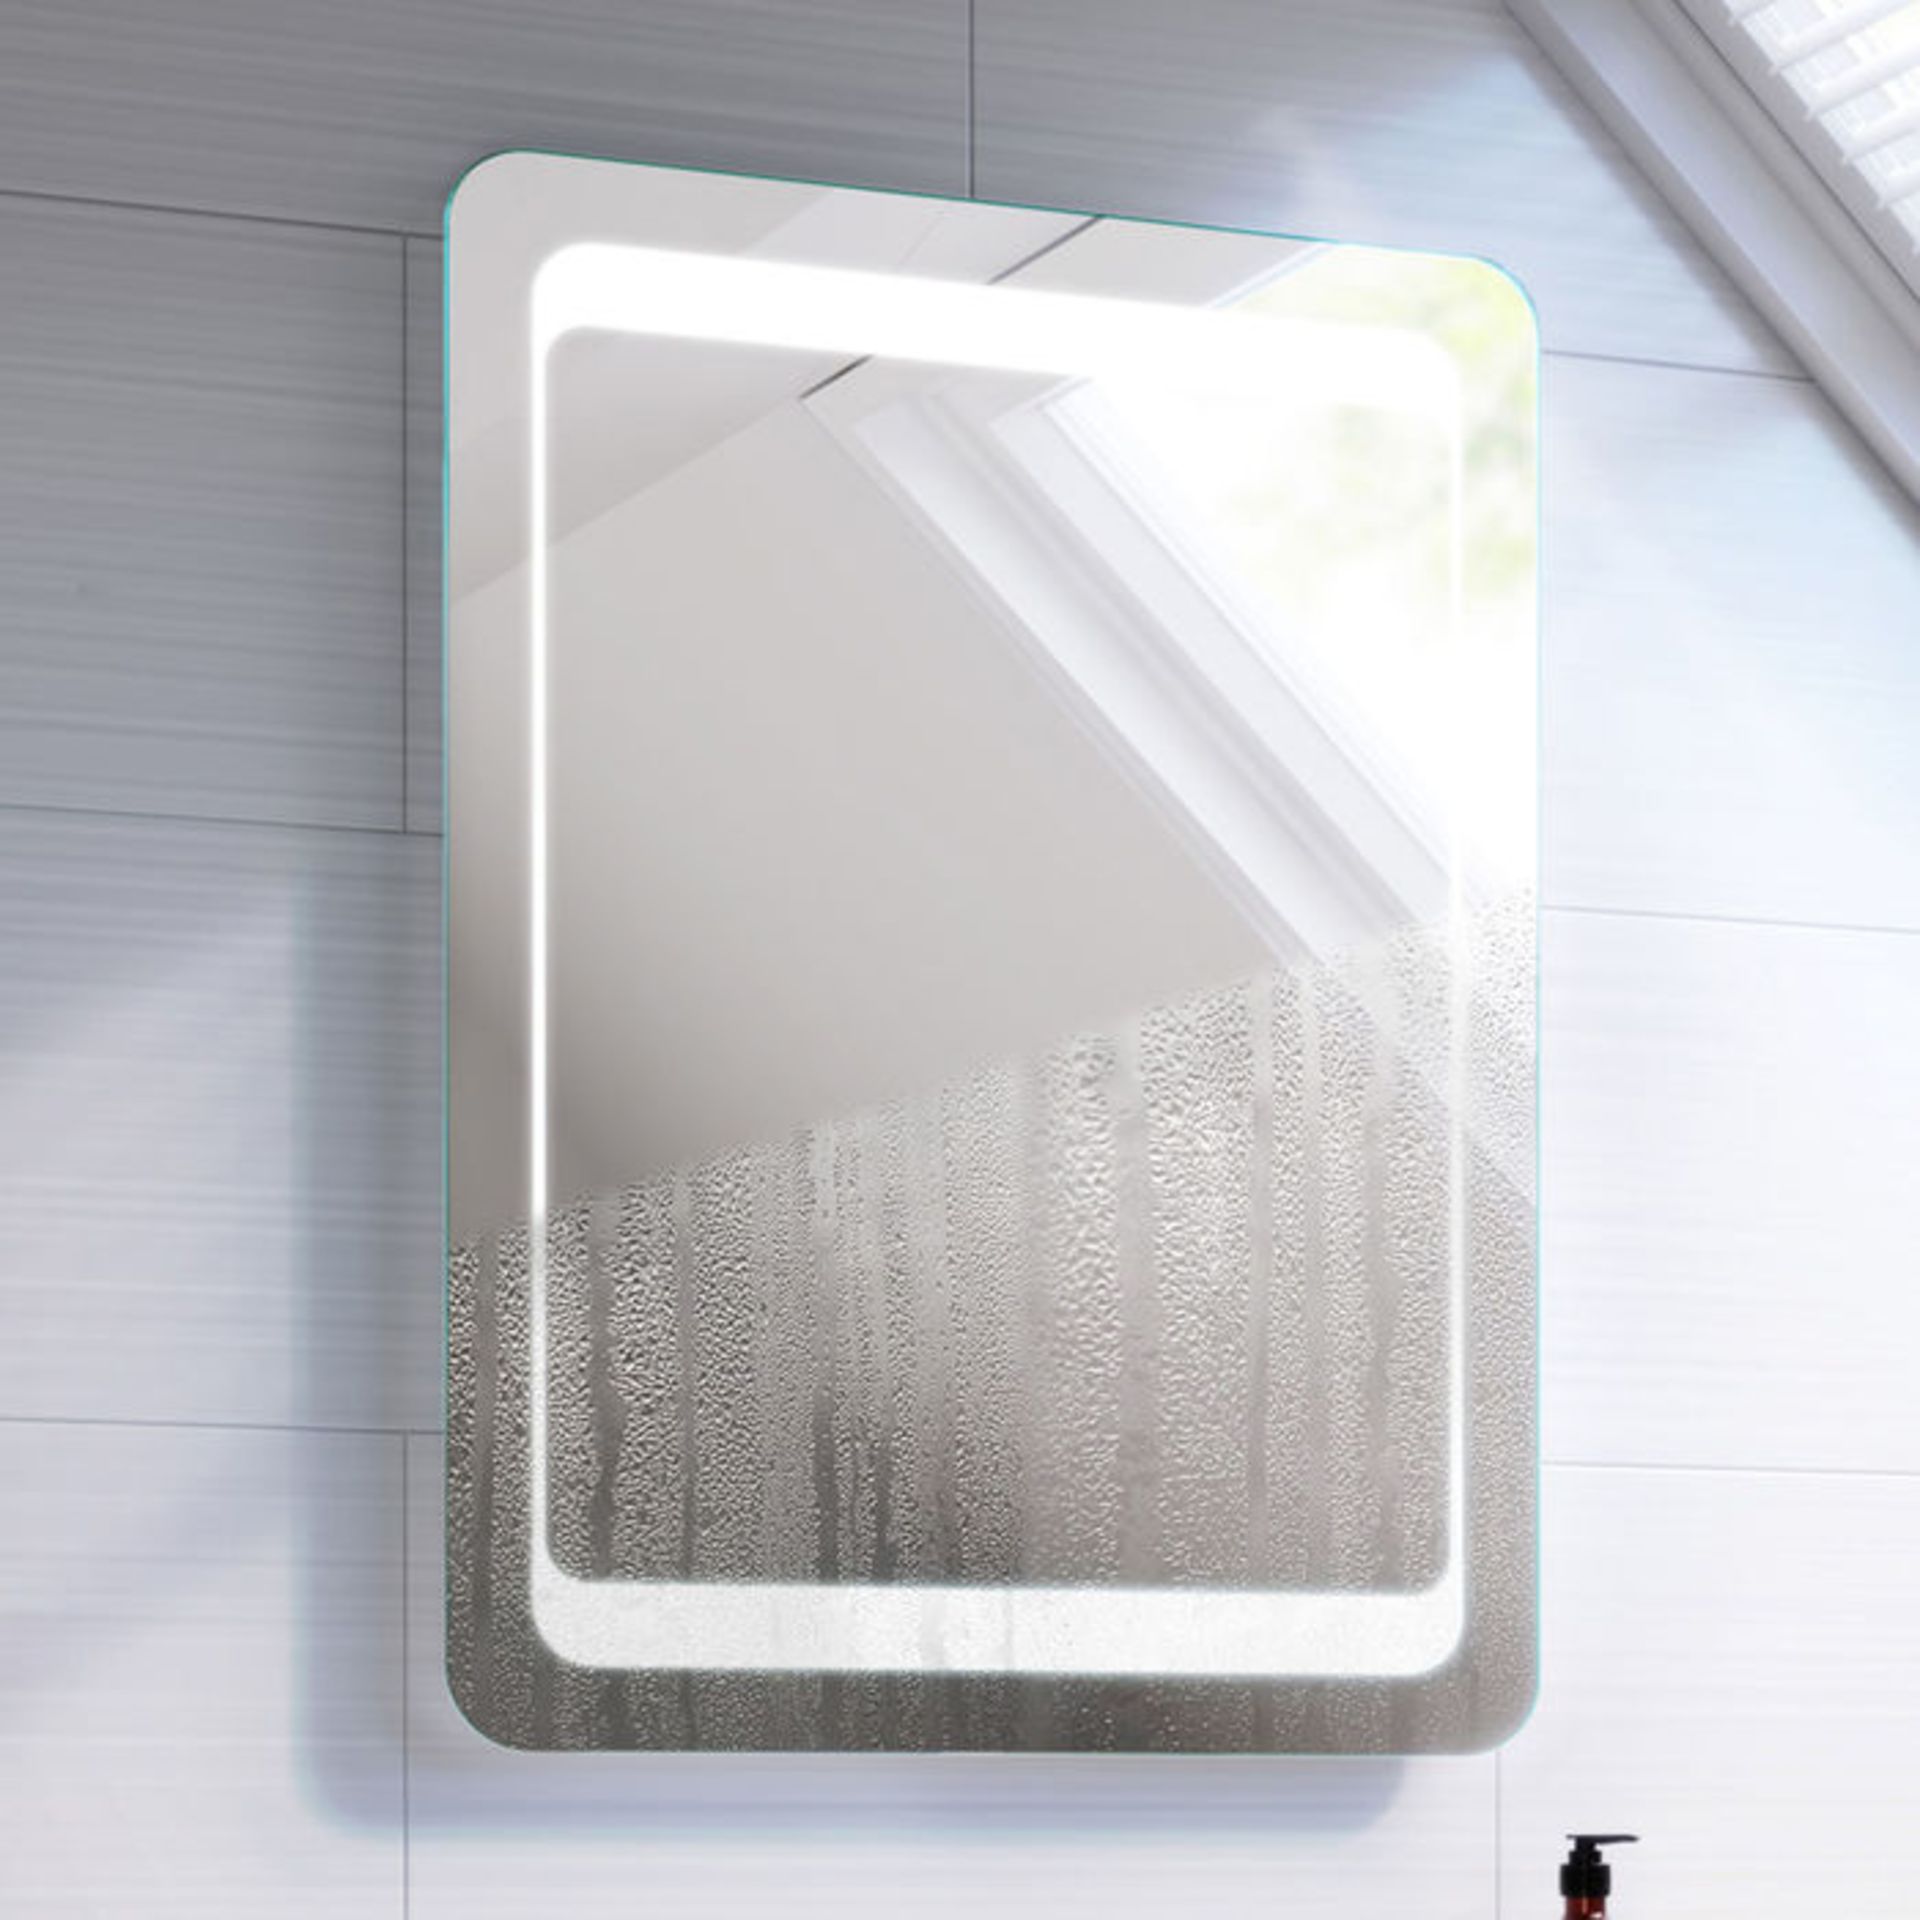 (GR114) 800x600mm Quasar Illuminated LED Mirror RRP £349.99. Energy efficient LED lighting with IP44 - Image 4 of 5